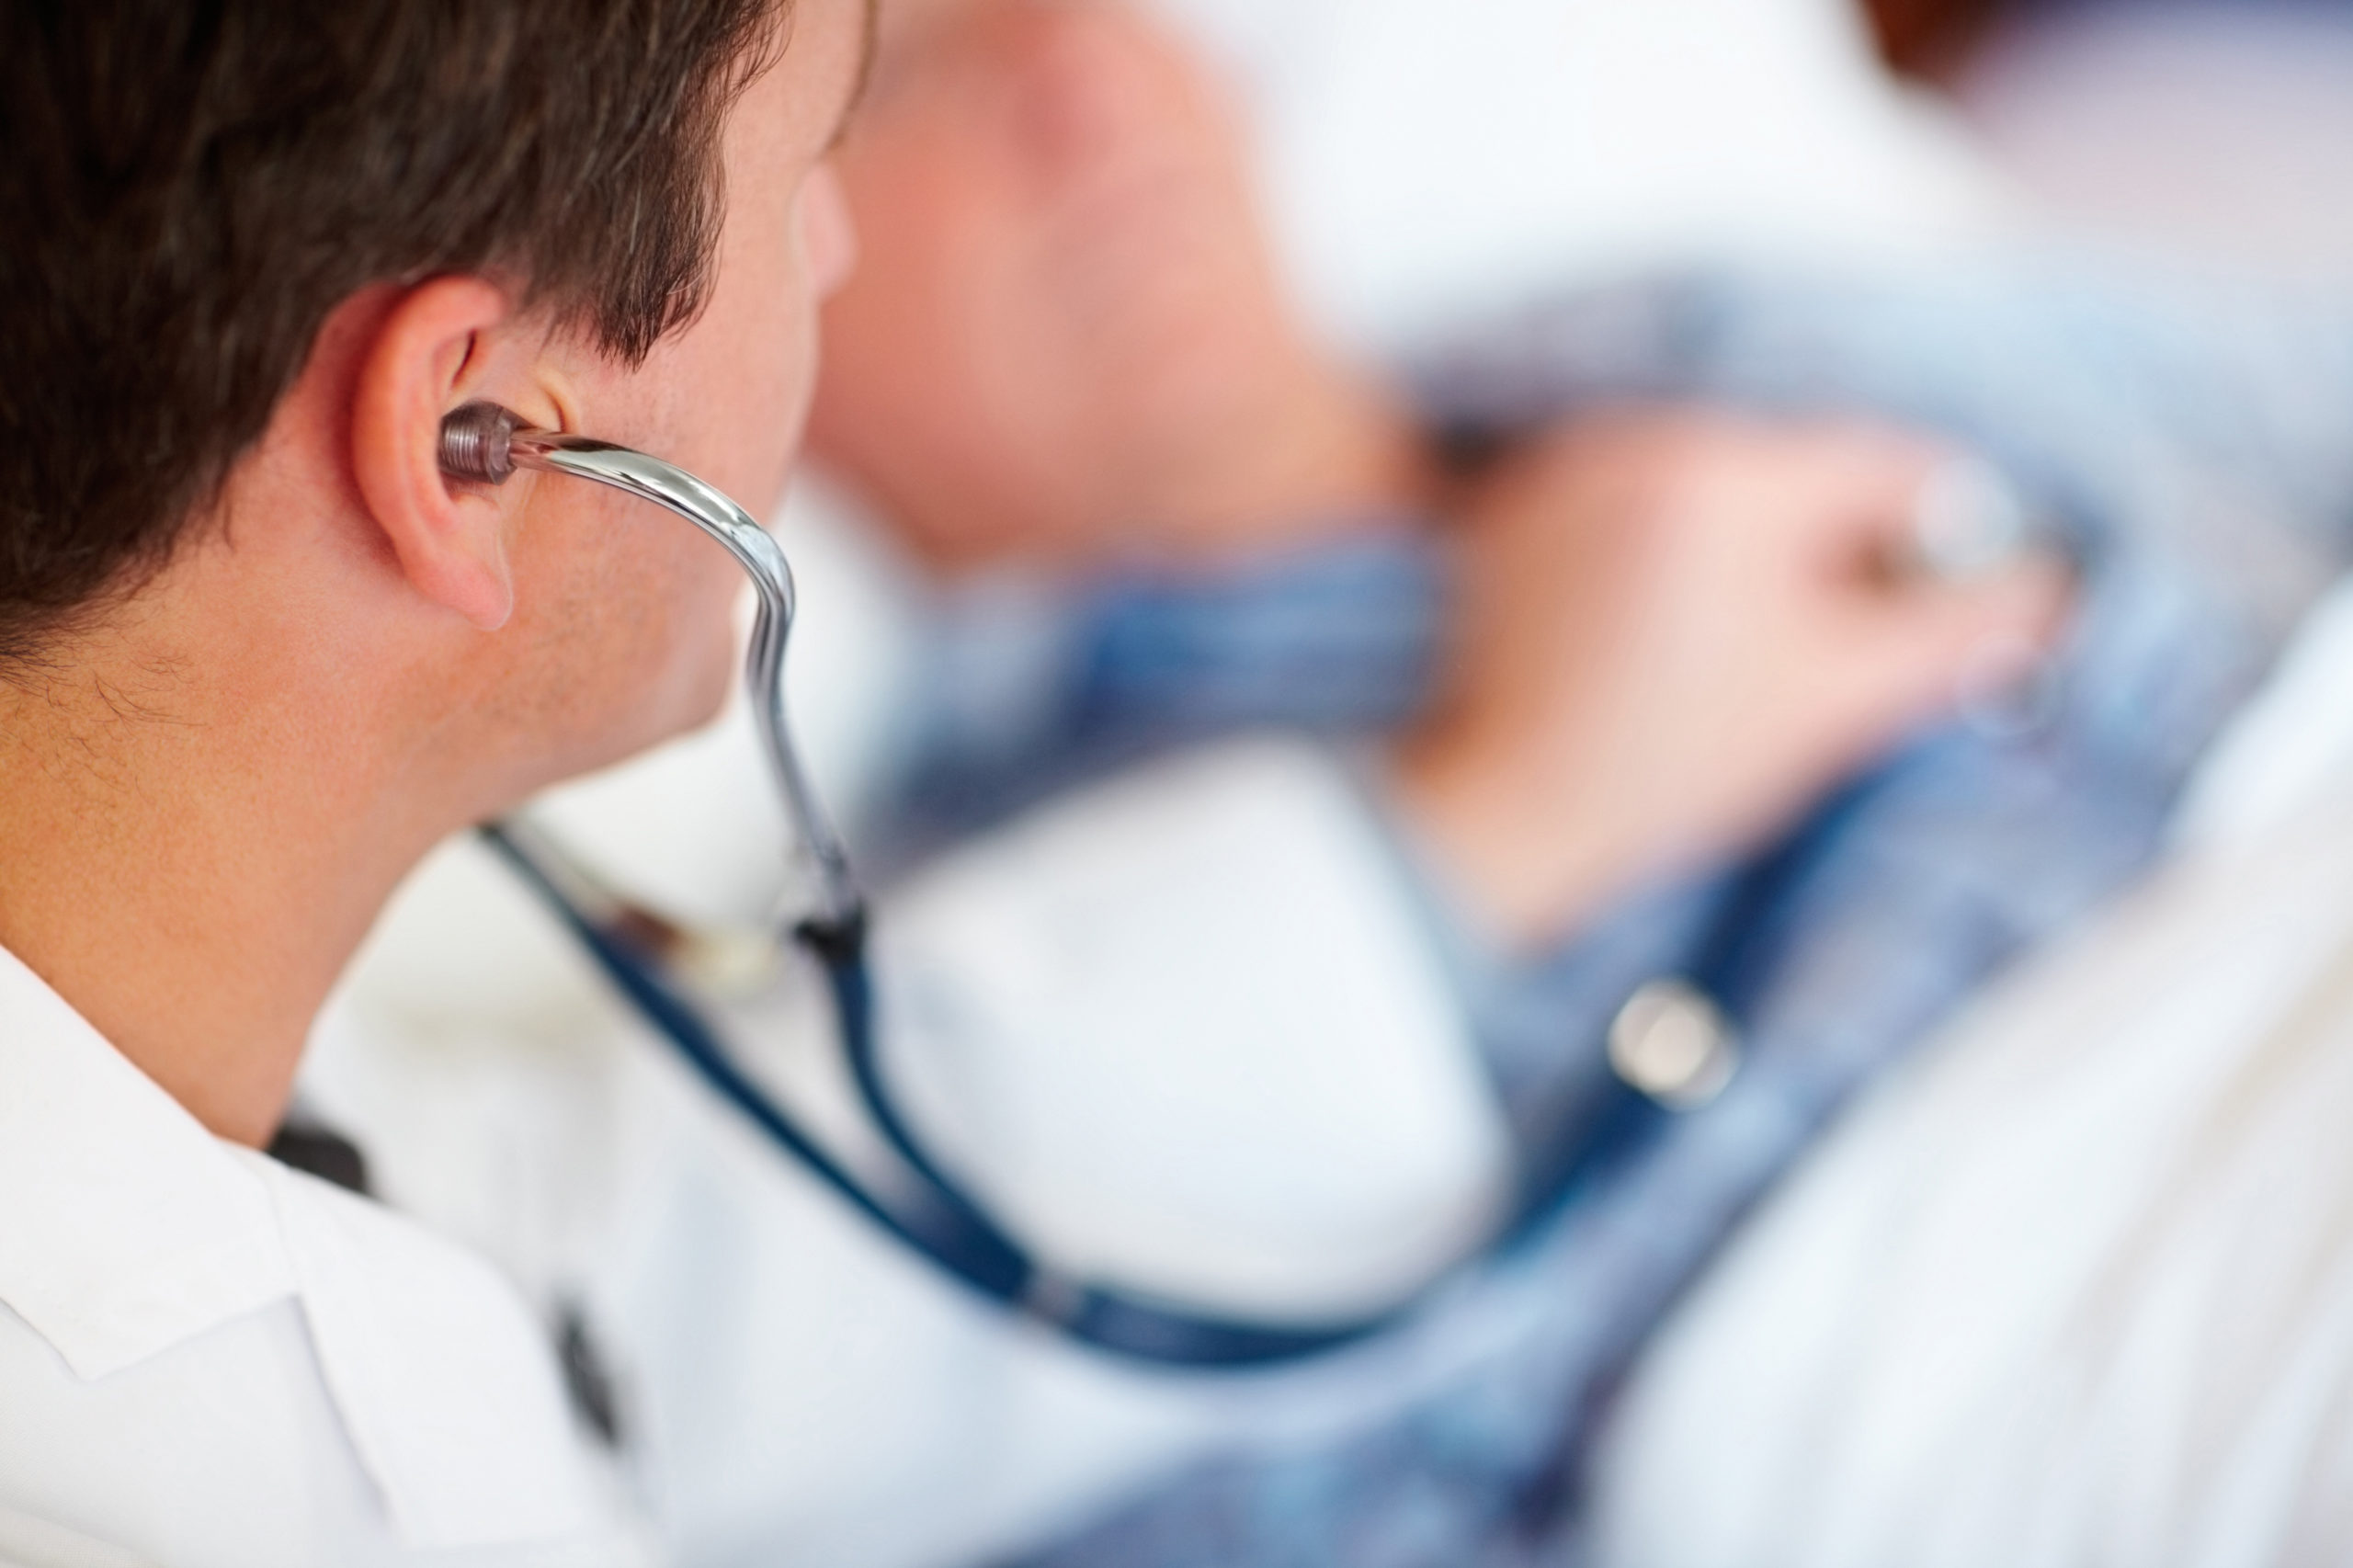 Male doctor listening to a patient's heart with a stethoscope